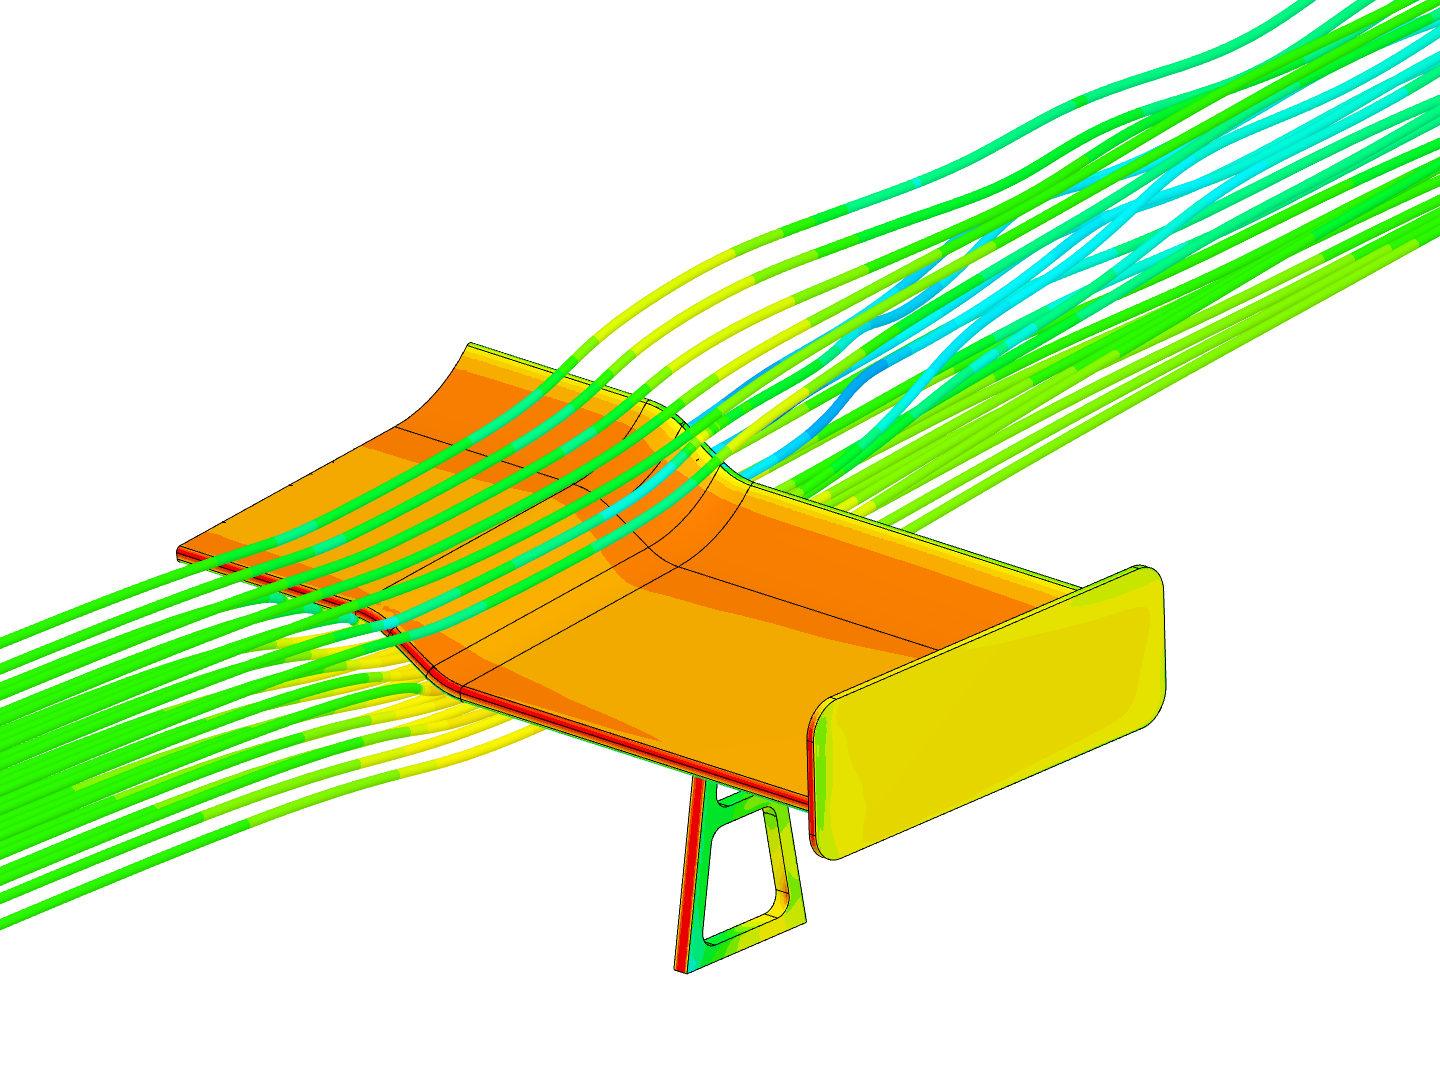 cfd project airflow image